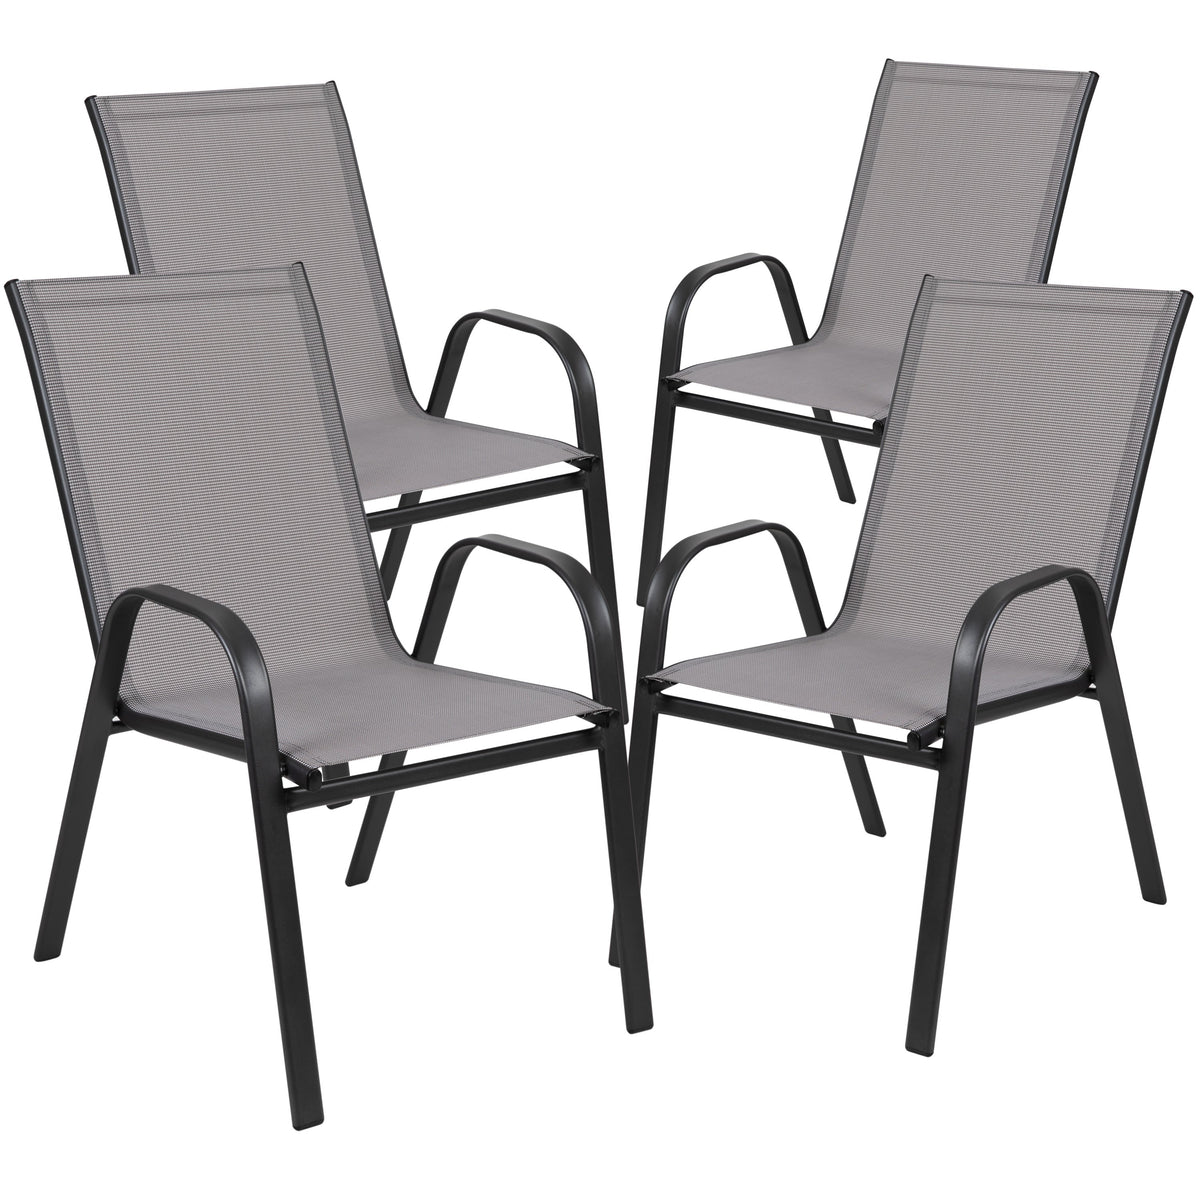 Gray |#| 3 Piece Patio Dining Set - 23.5inch Square Glass Table, 2 Gray Flex Stack Chairs